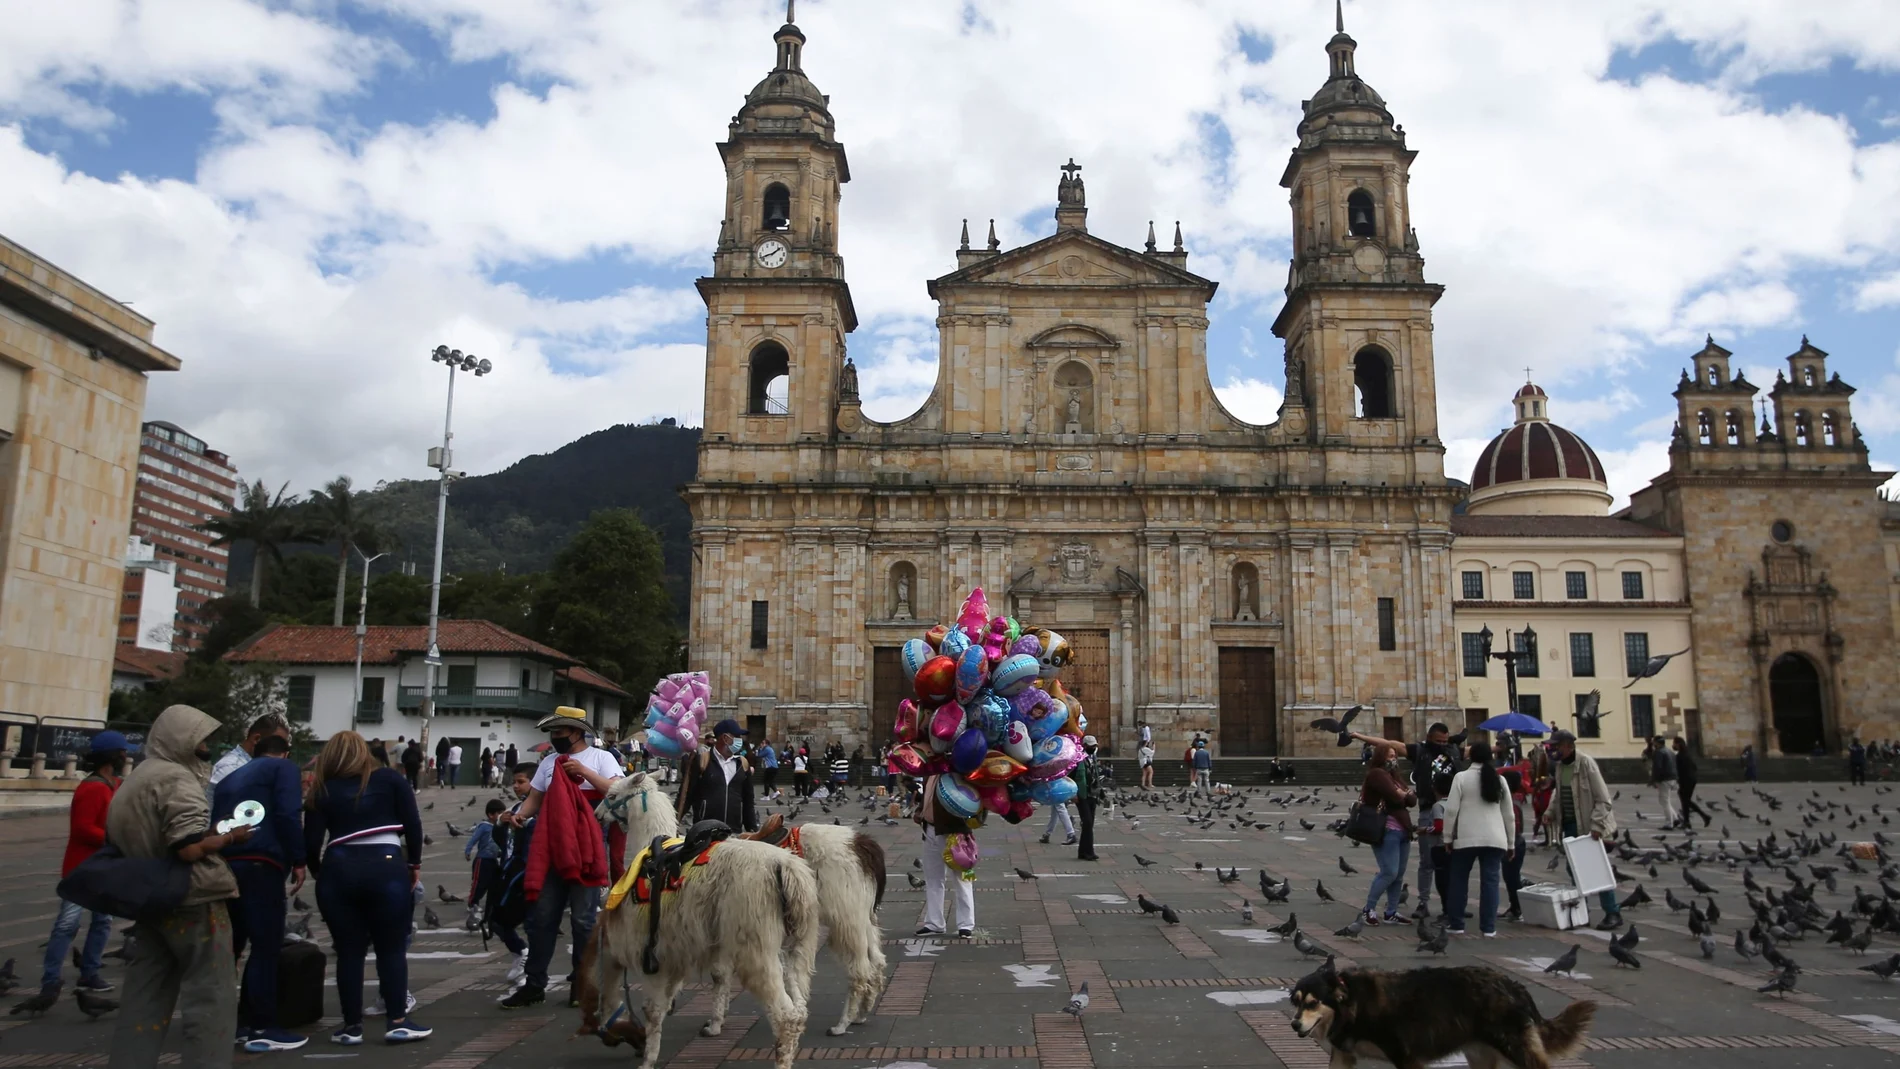 People wearing face masks are seen in the Plaza de Bolivar before the start of a mandatory total isolation decreed by the mayor's office, amidst an outbreak of the coronavirus disease (COVID-19), in Bogota, Colombia January 7, 2021. REUTERS/Luisa Gonzalez